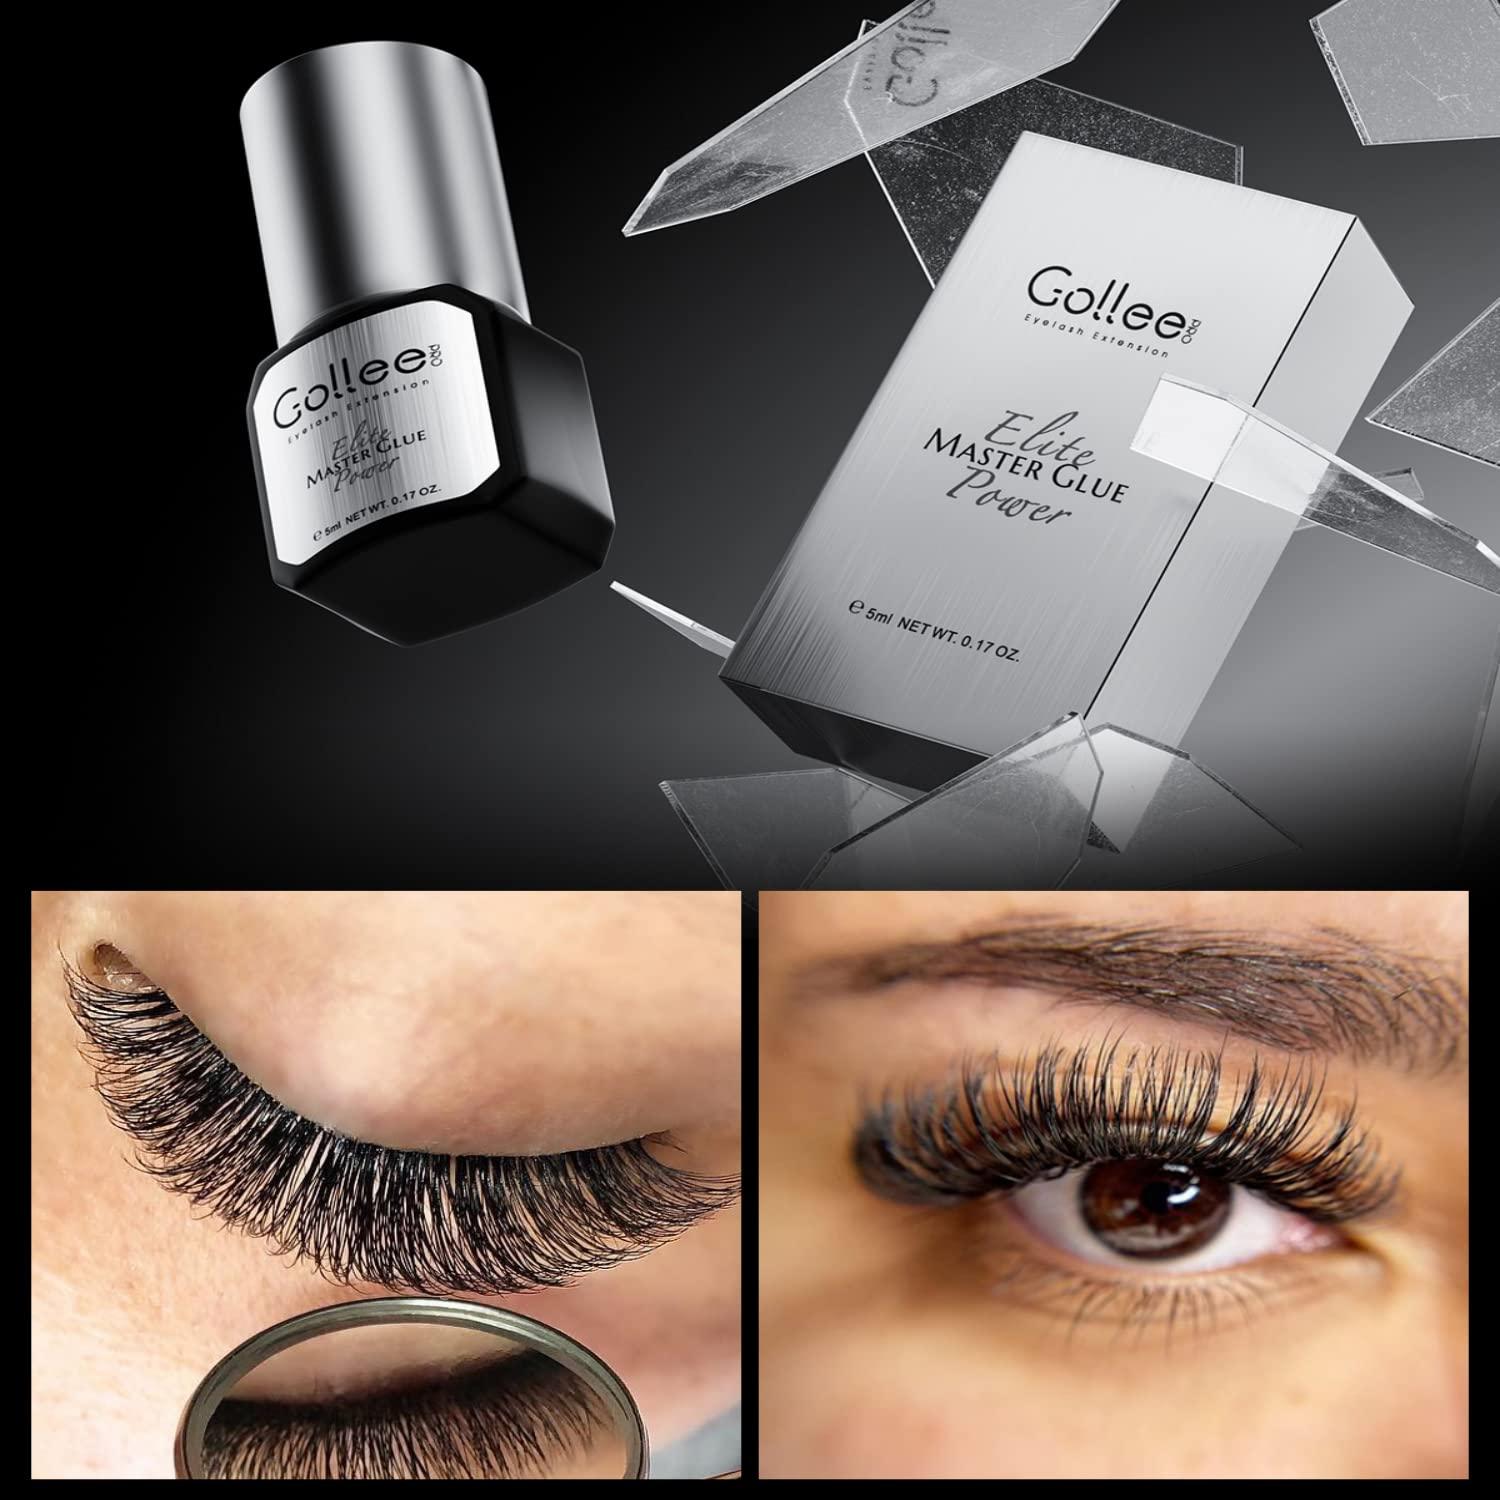 Safest & Best Performing lash adhesive on the market. Learn about our range  of professional lash adhesives for extensions. Choose from rapid dry,  volume & sensitive adhesives.